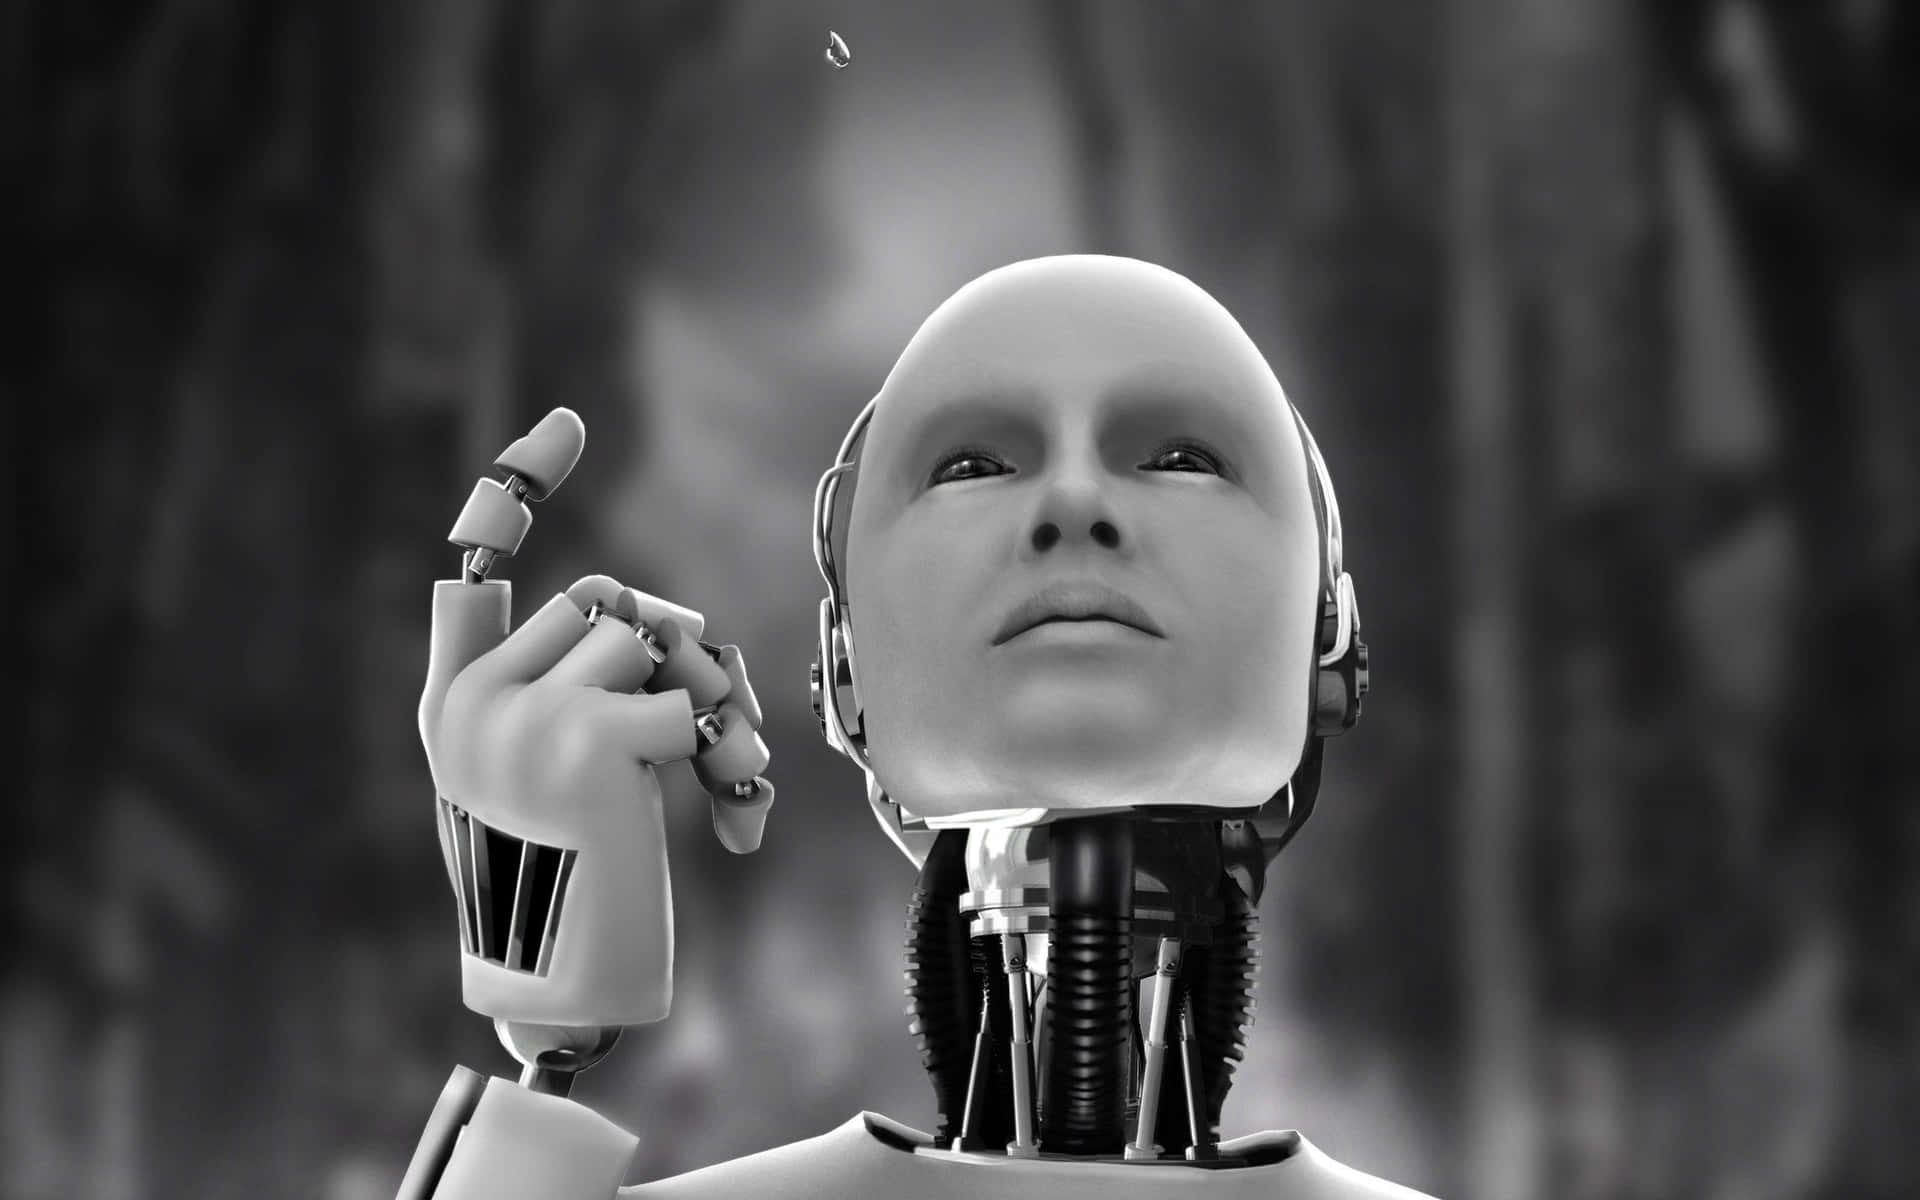 Futuristic Humanoid And Artificial Intelligence